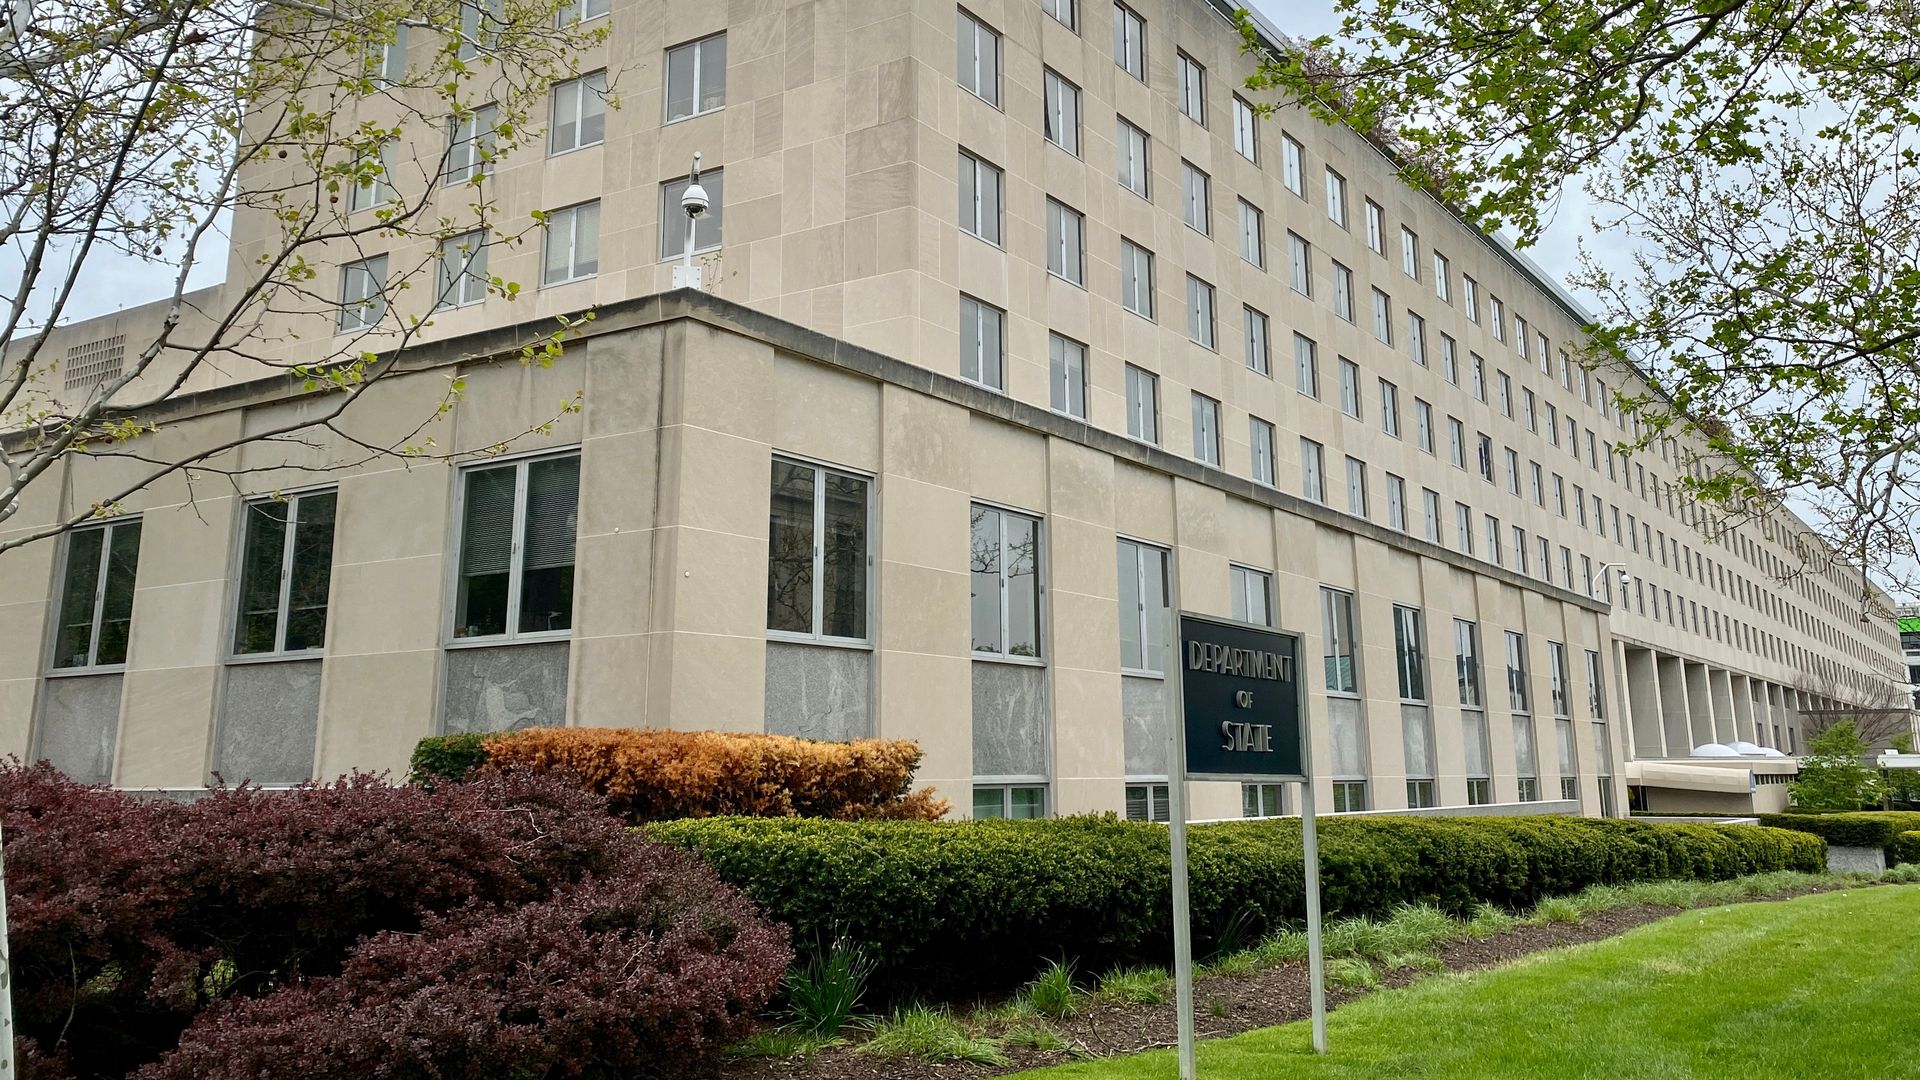 Photo of the Department of State building with a sign engraved with its name in the front lawn